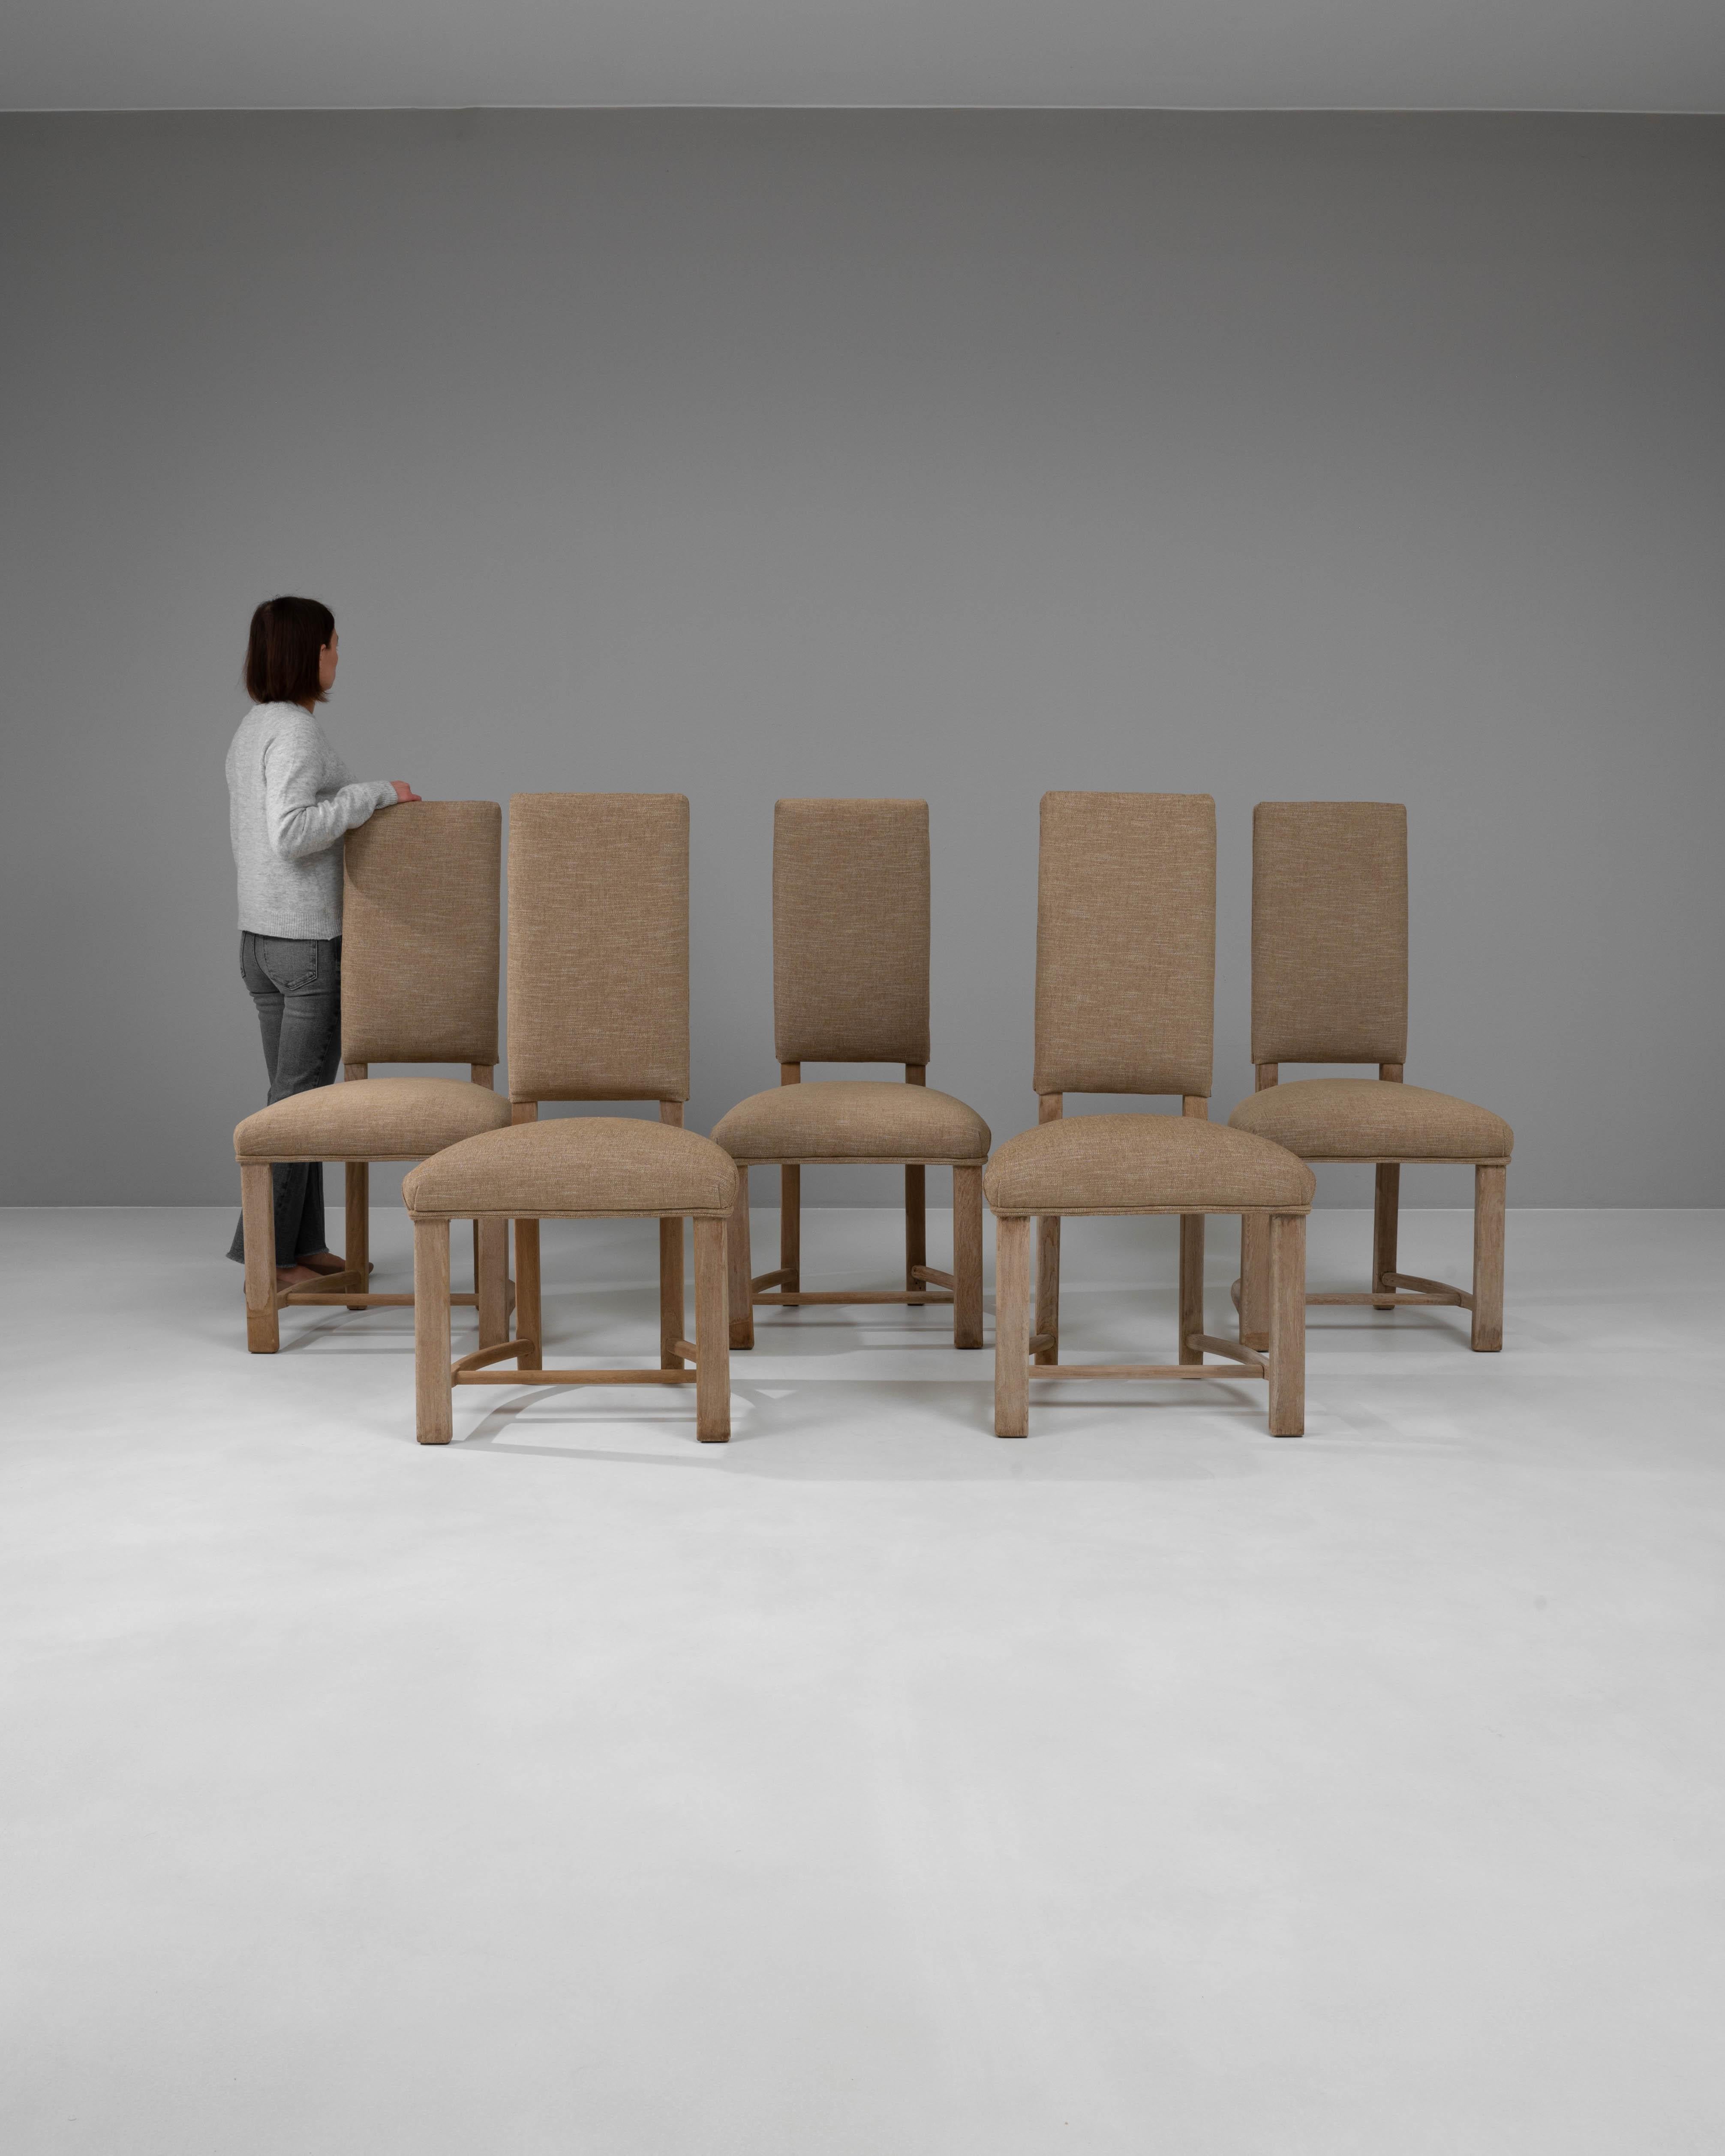 Presenting a chic and streamlined set of five 20th Century French Bleached Oak Dining Chairs, each boasting an elegant and minimalist design that complements any modern dining area. These chairs feature sturdy, bleached oak frames that enhance their